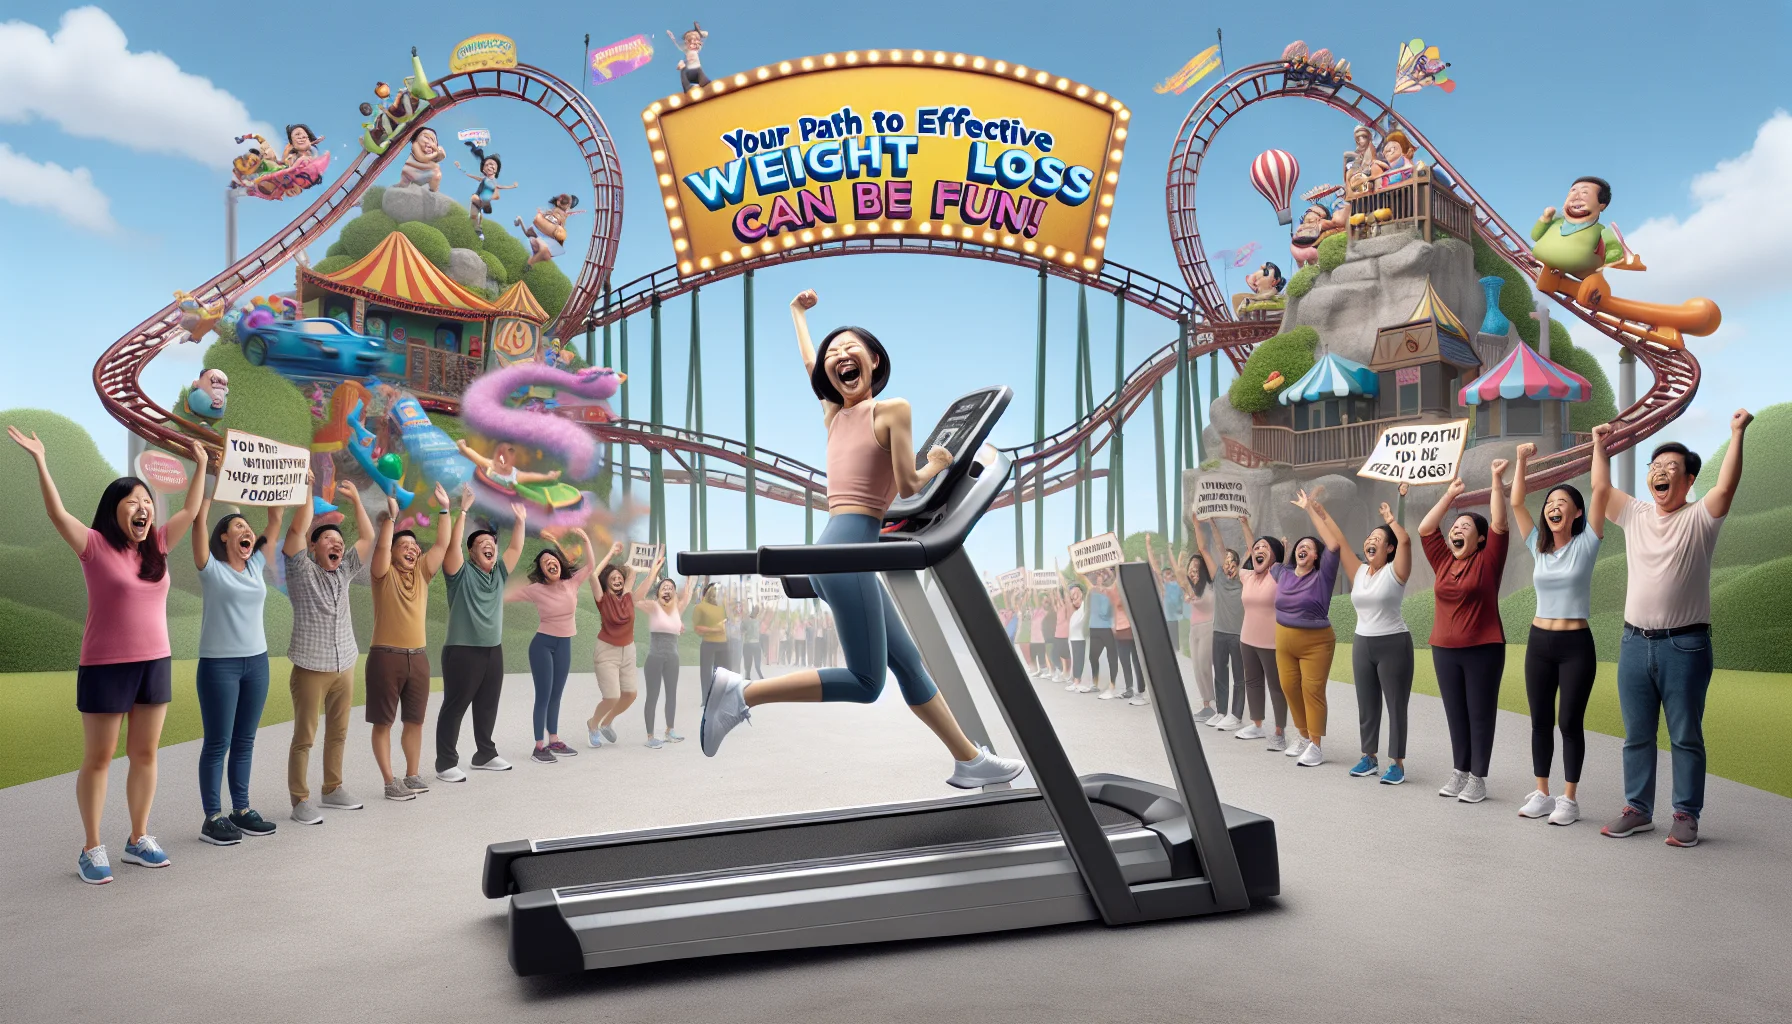 Imagine a humorous and realistic scene promoting an effective weight loss program. In the center, a treadmill is transformed into an exciting roller coaster ride, with colorful decorations and fun park aesthetics all around it. On this 'fitness roller coaster', an Asian woman is laughing out loud as she runs, her arms thrown high in joy, mimicking the thrill of a roller coaster ride. Around, a cheering audience of individuals of different descents and genders, holding signs saying, 'Your path to health can be fun!' The phrase 'Your Path to Effective Weight Loss' is emblazoned across the sky.